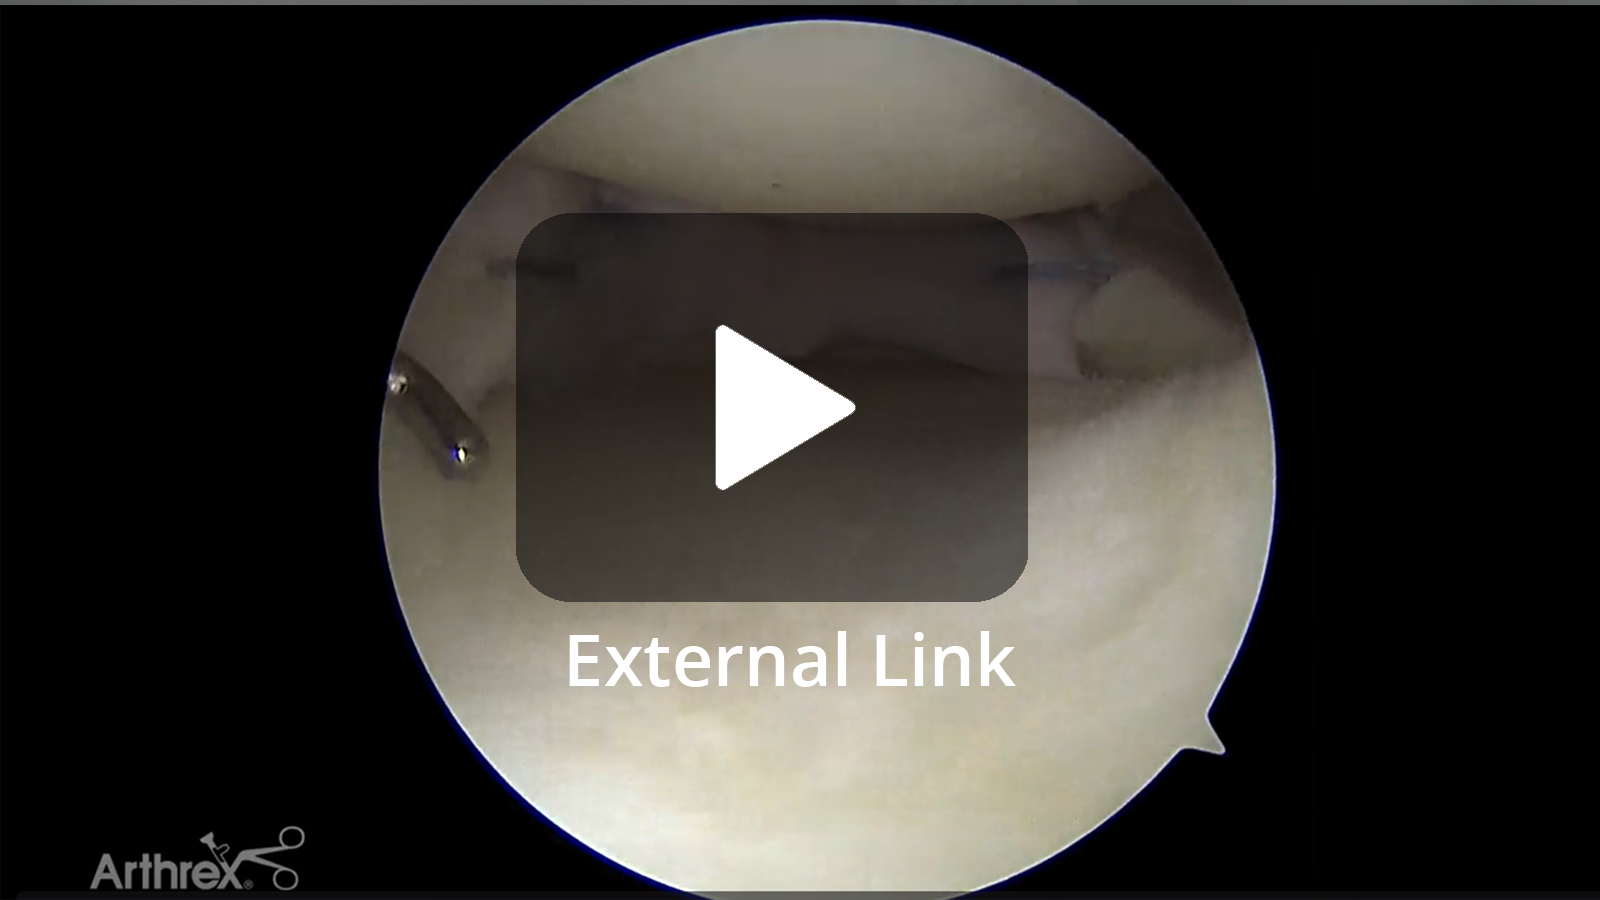 Patrick A. Smith, MD (Columbia, MO), performs a segmental meniscal allograft transplantation procedure. The entire technique and several pearls are included, including defect preparation and measurement as well as graft preparation and fixation. (External Link)